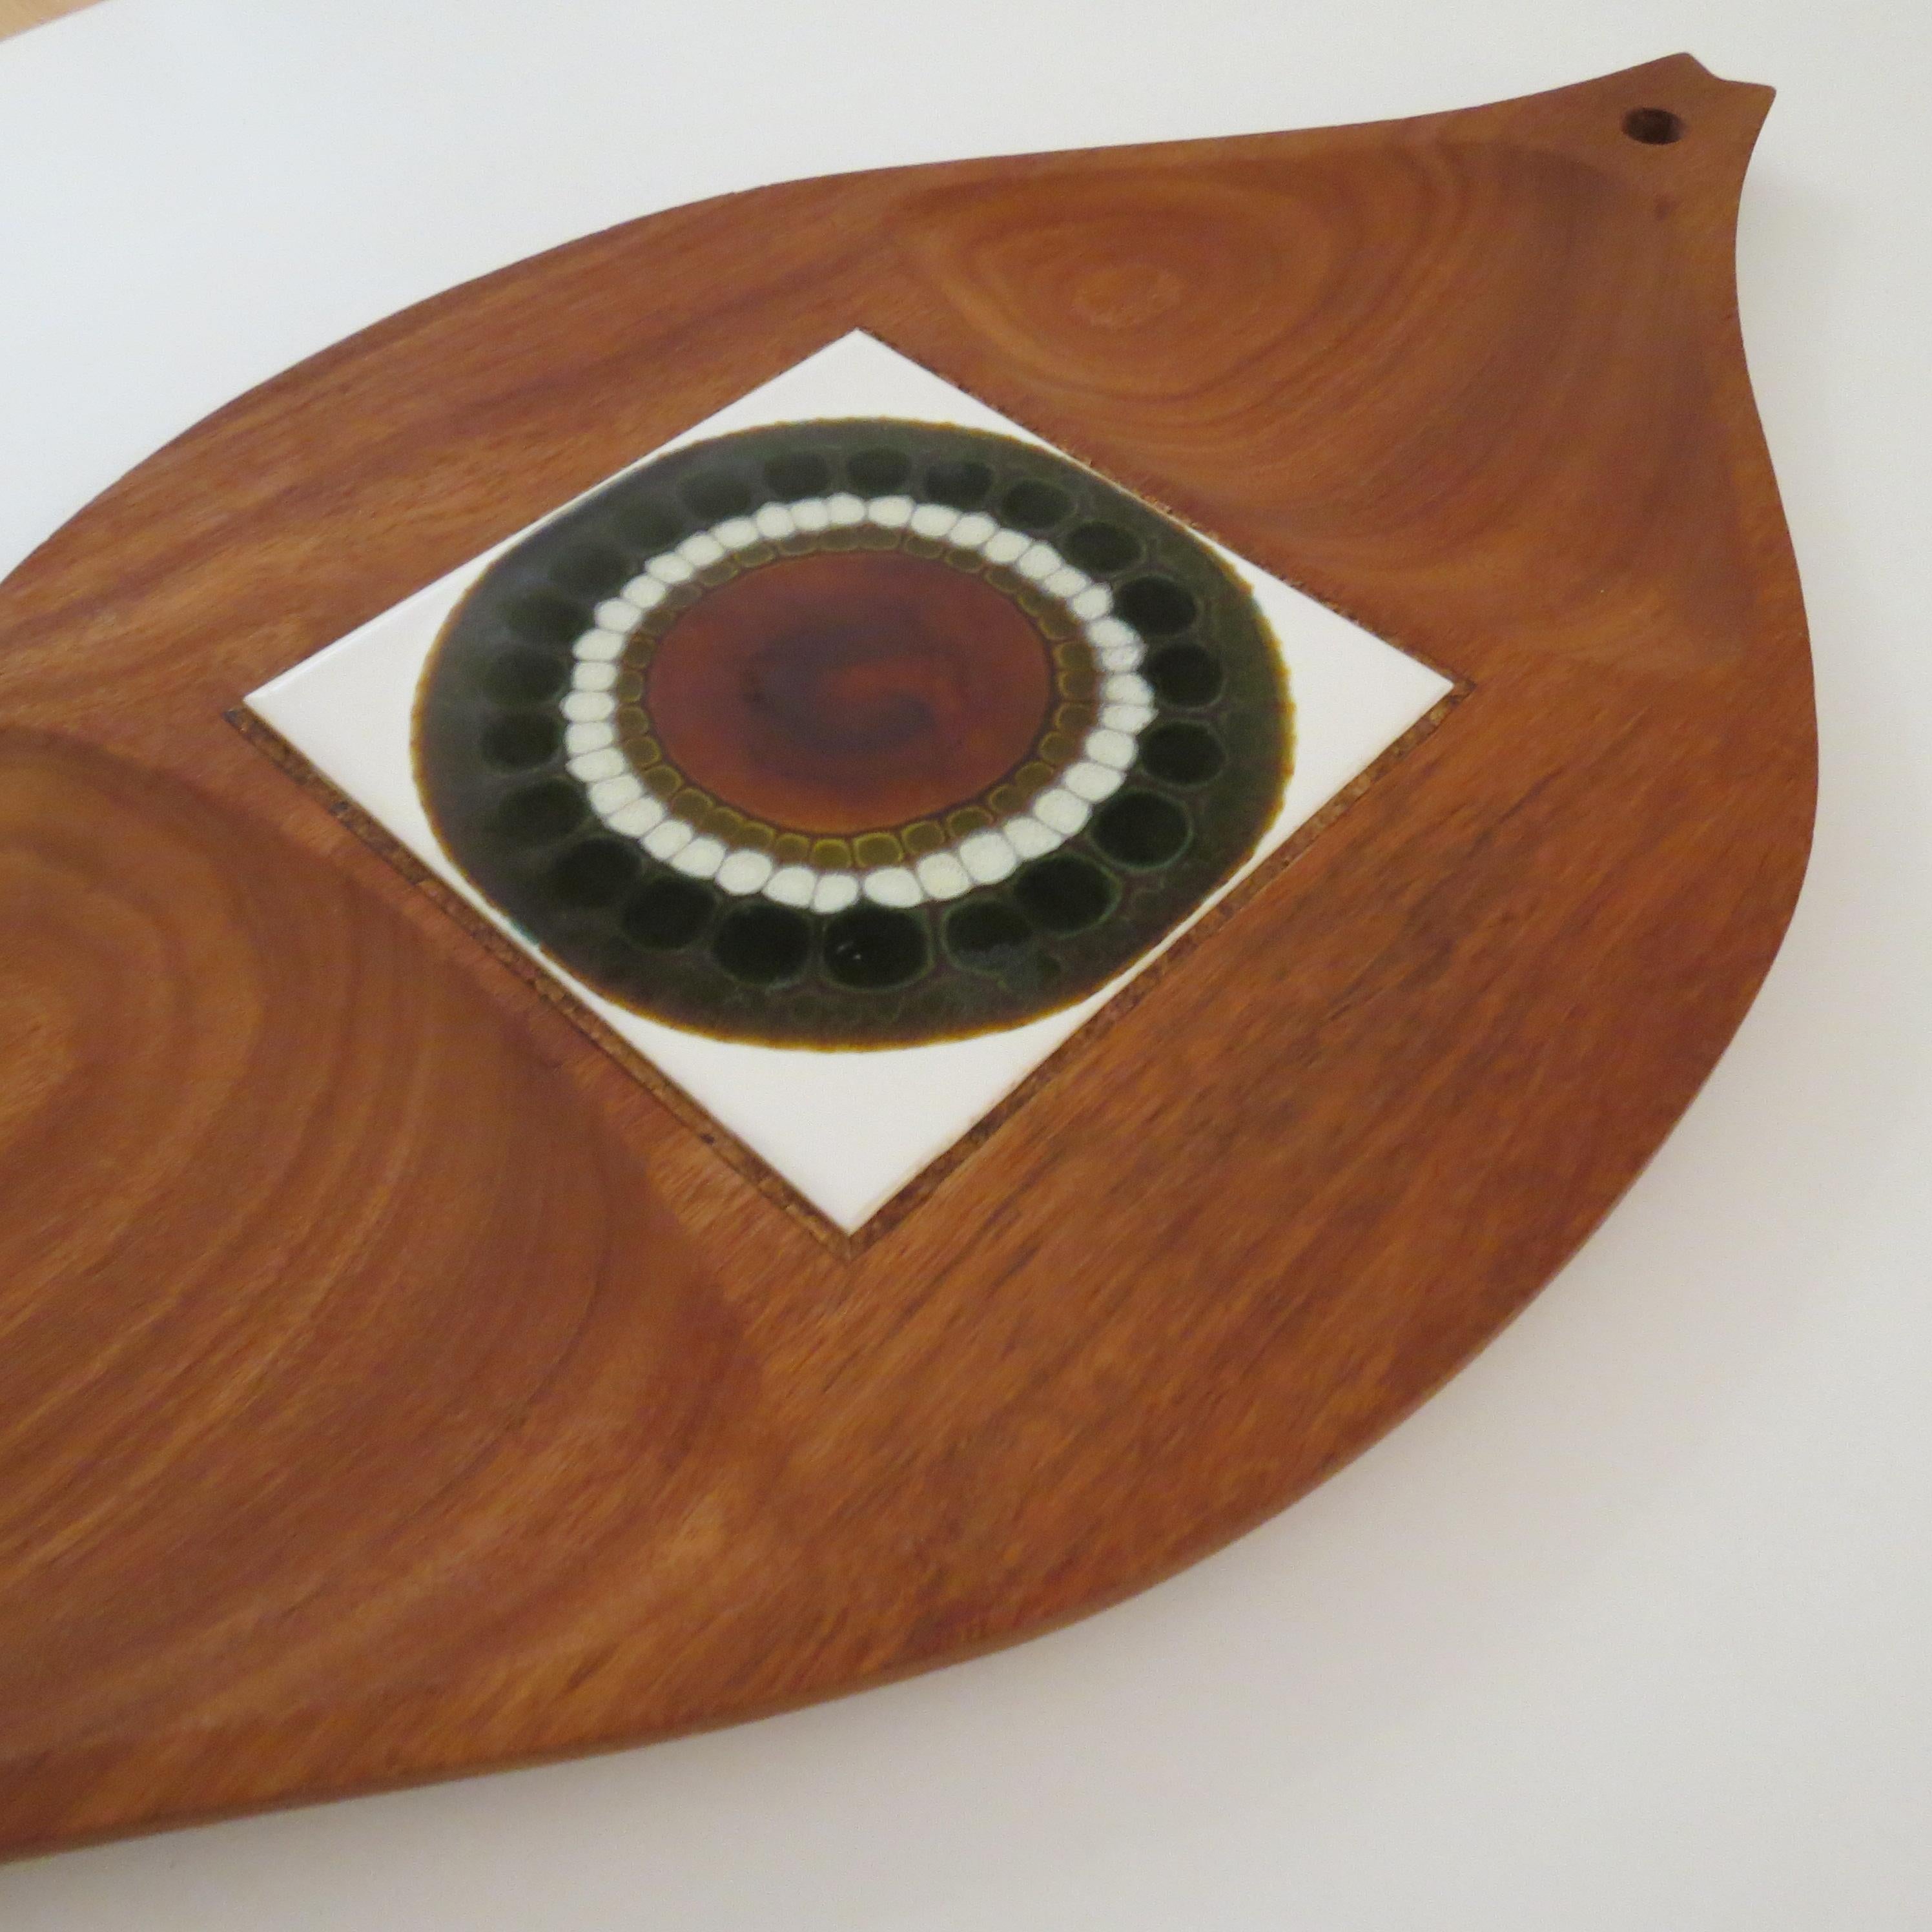 English Midcentury Teak Tray With Tile Insert By Allan Wallwork 1970 For Sale